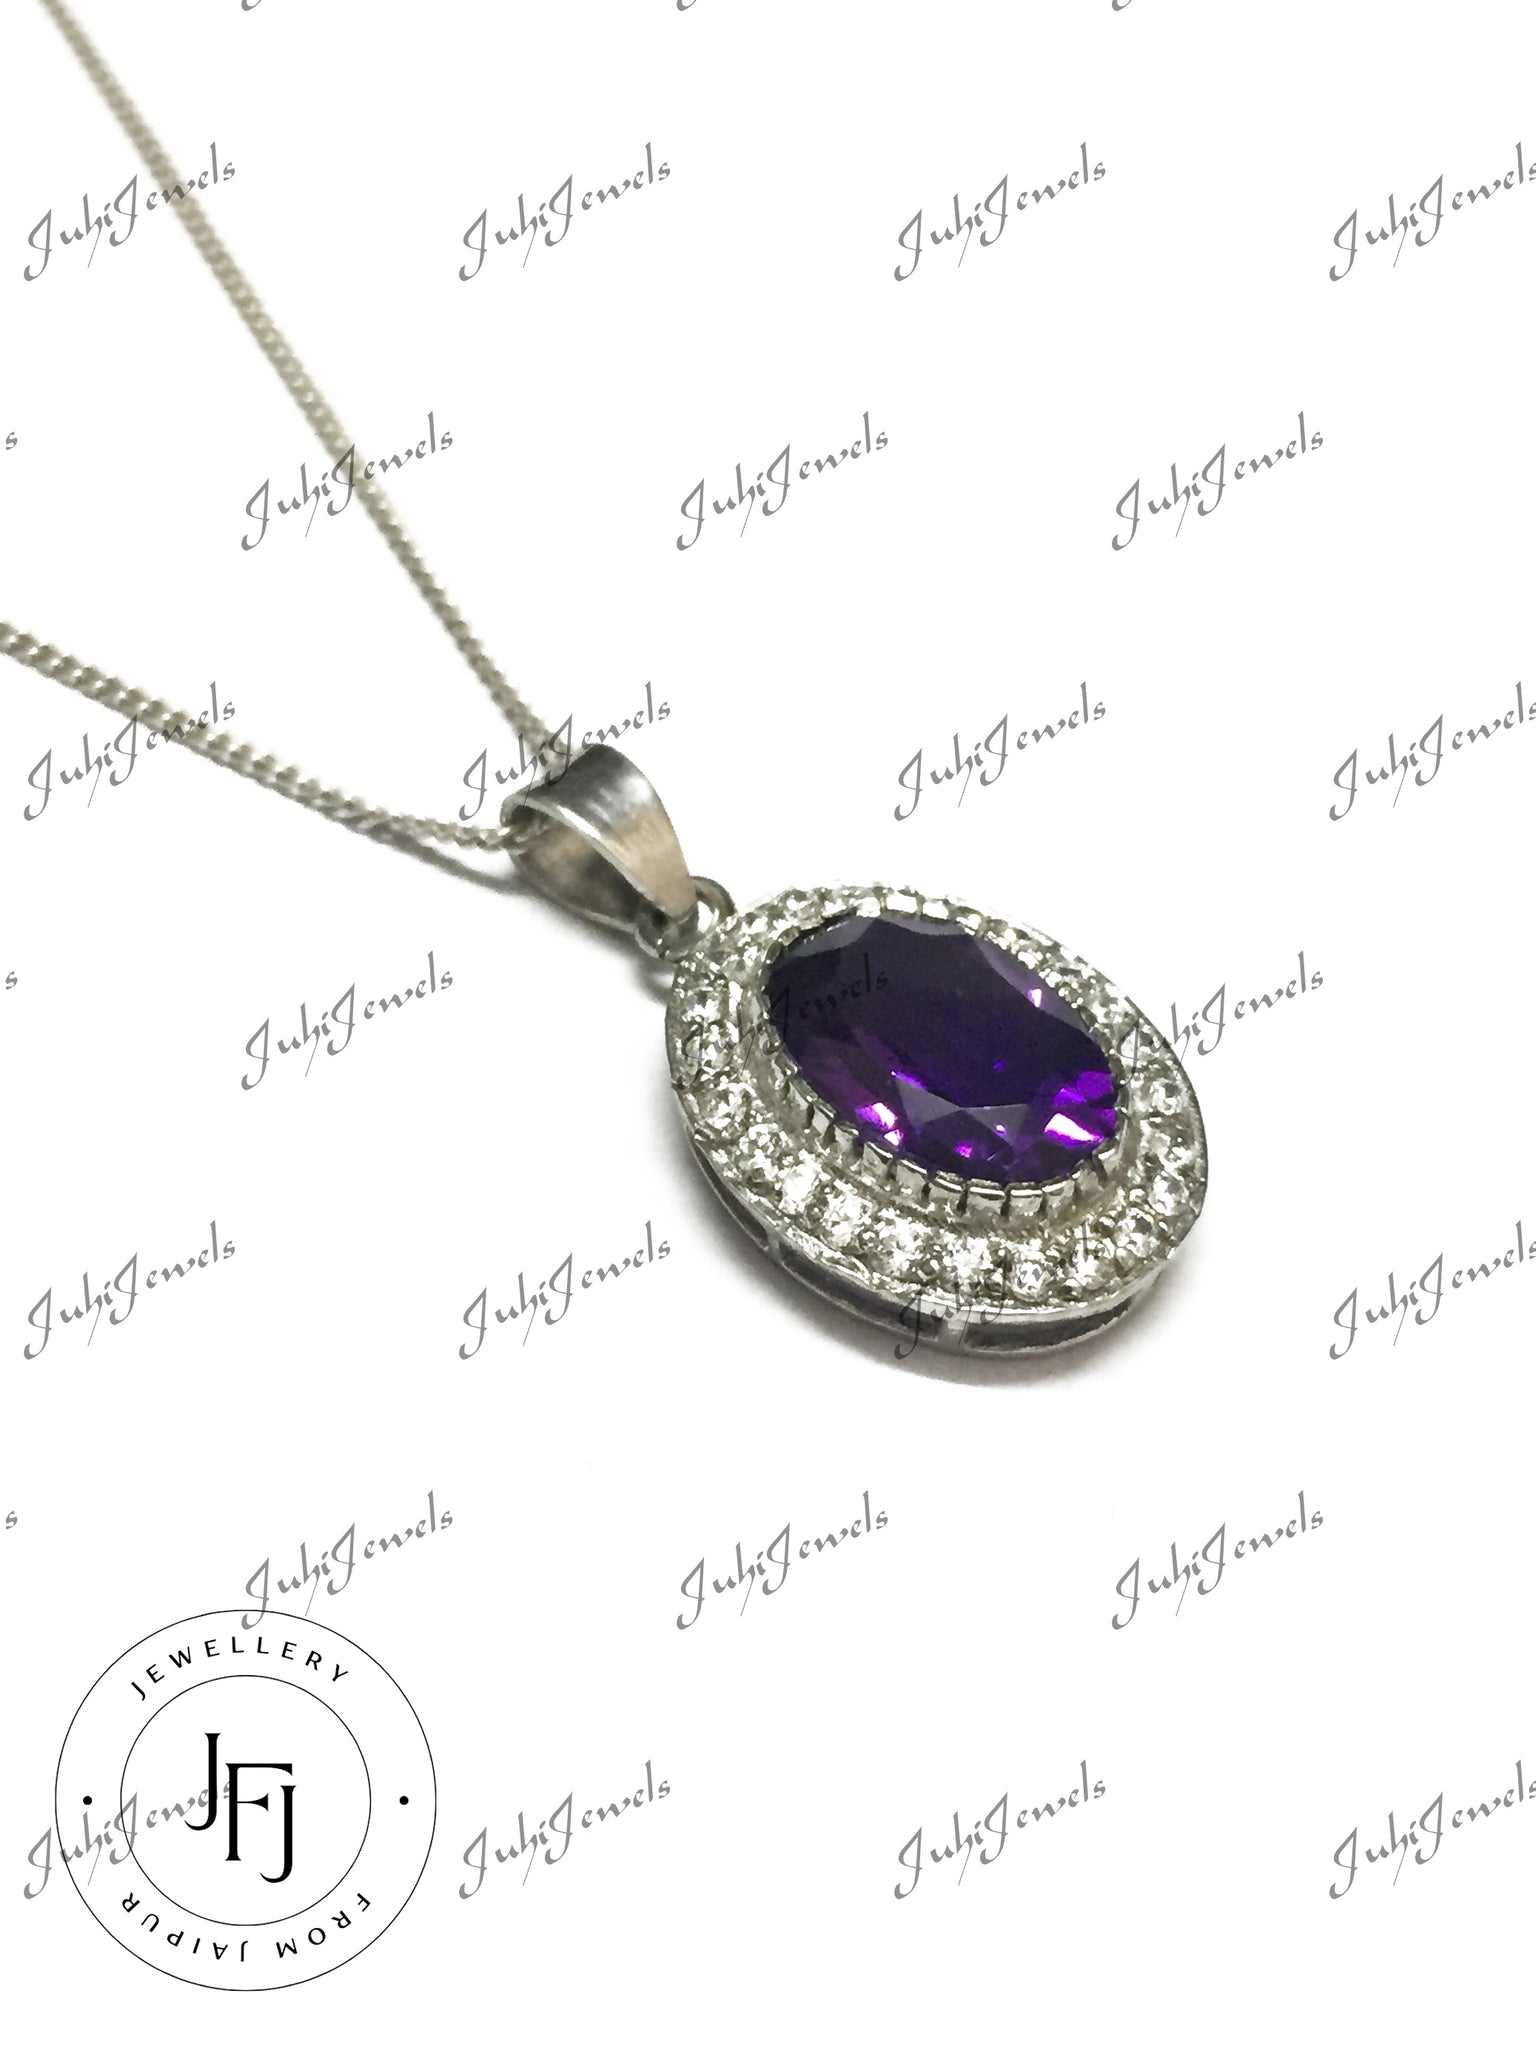 Large Amethyst Necklace 10 x 14 mm Oval Amethyst 925 Sterling Silver Amethyst Pendant 6.5 Ct Amethyst Amethyst Necklace February Birthstone